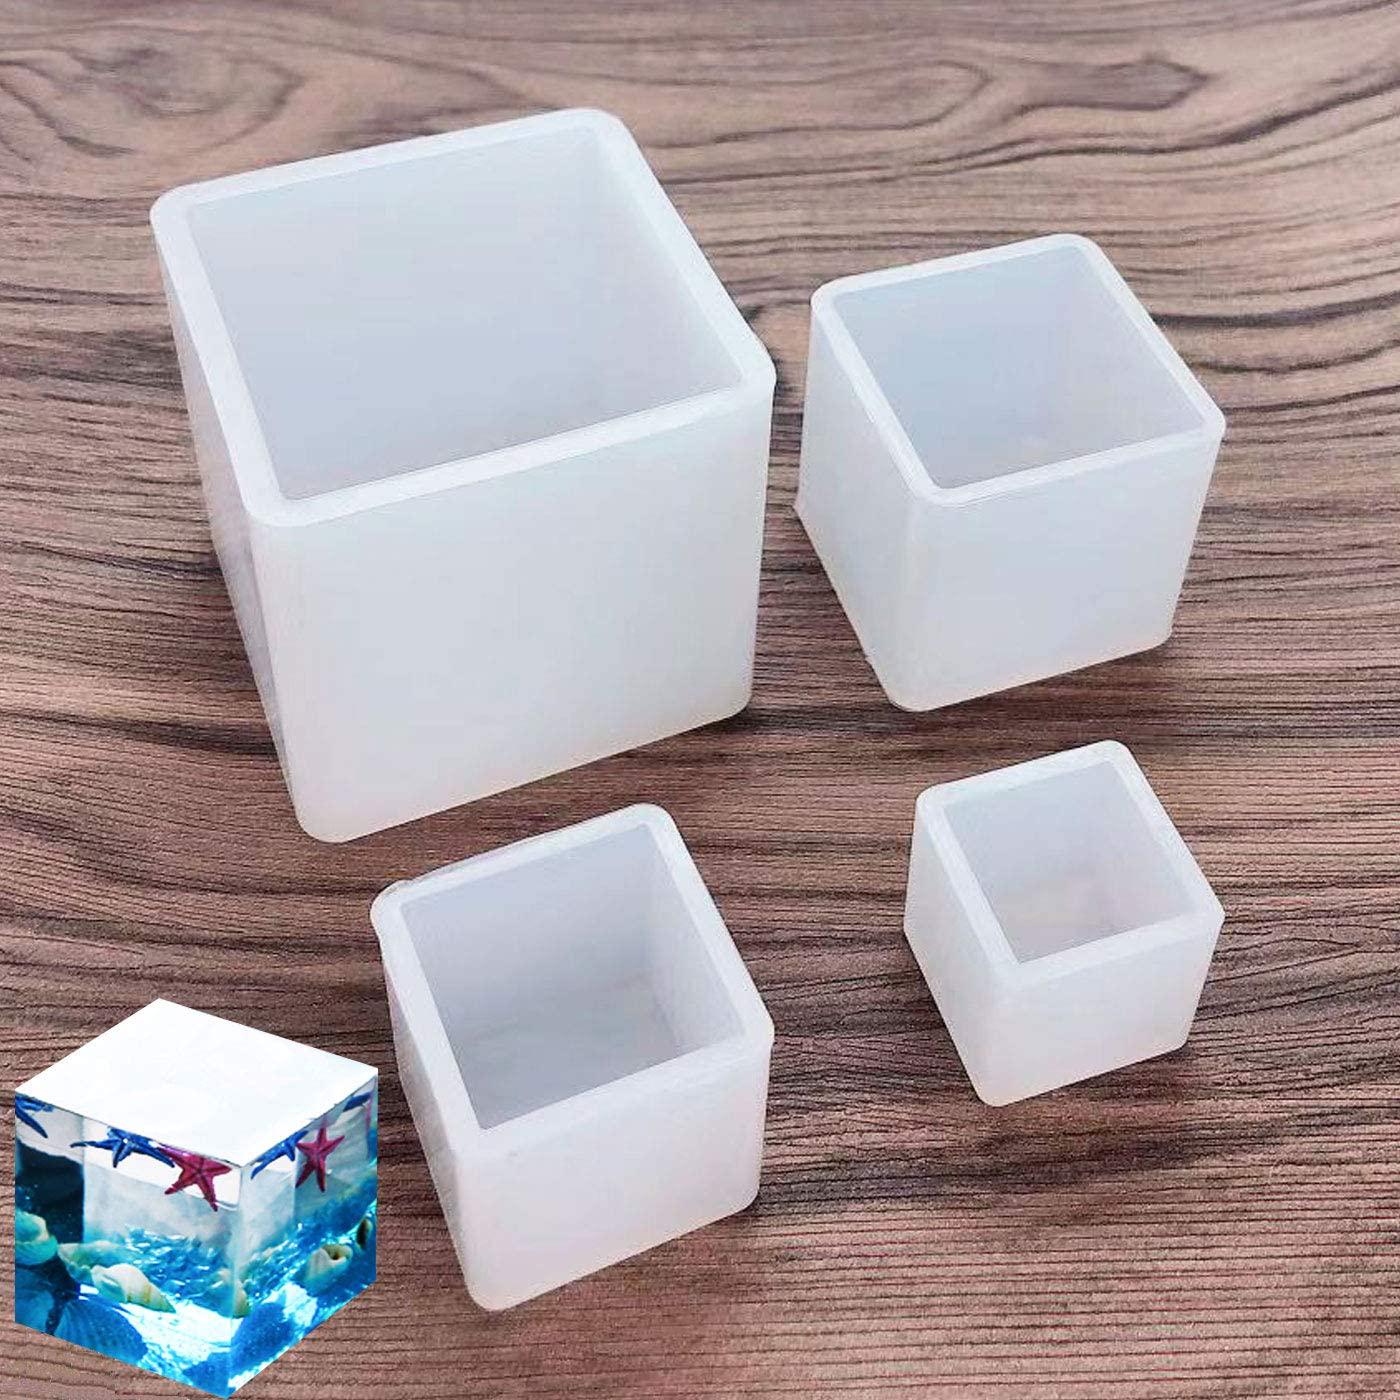 Luckkyme, Luckkyme Resin Casting Molds Square Mold Cube Silicone Molds for DIY Craft Making Silicone Clear Casting Molds, 4Size